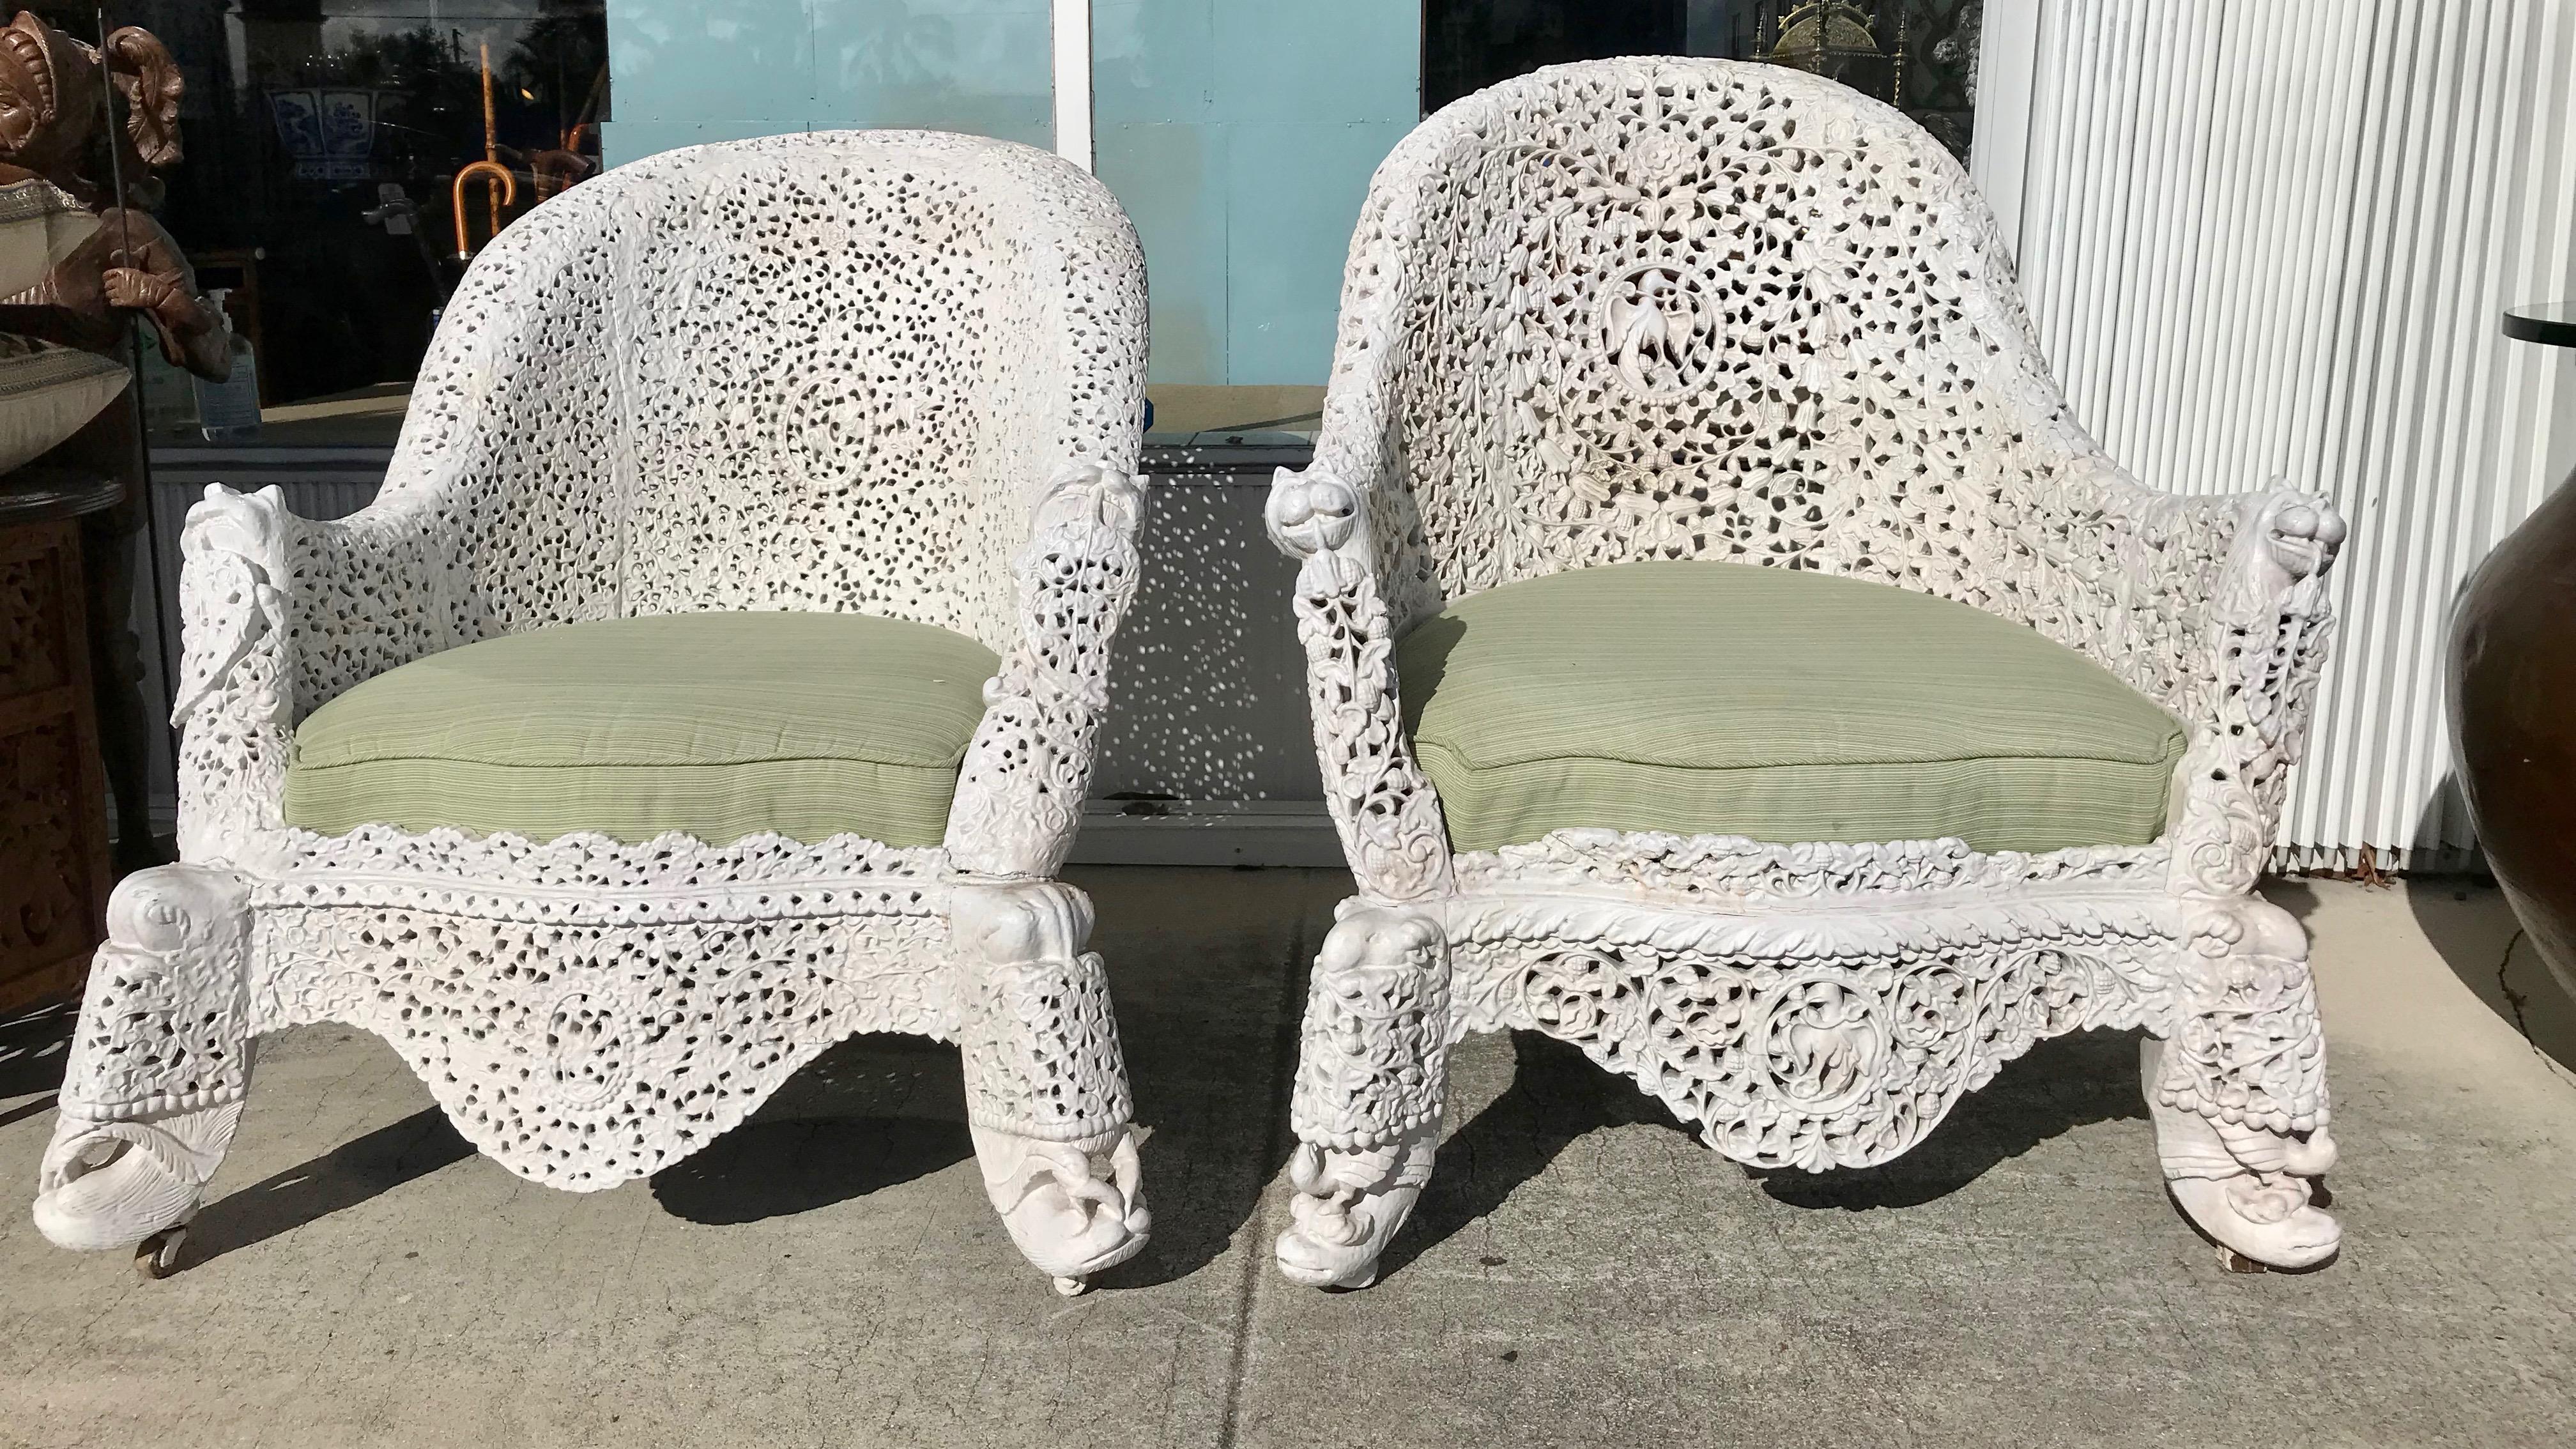 Elaborately and ornately carved and generously scaled hardwood chairs-
- his and hers as one is somewhat larger.
The chairs are appointed with tiger heads and raised upon elephant motif
feets. They are coated with white paint , as is the fashion,